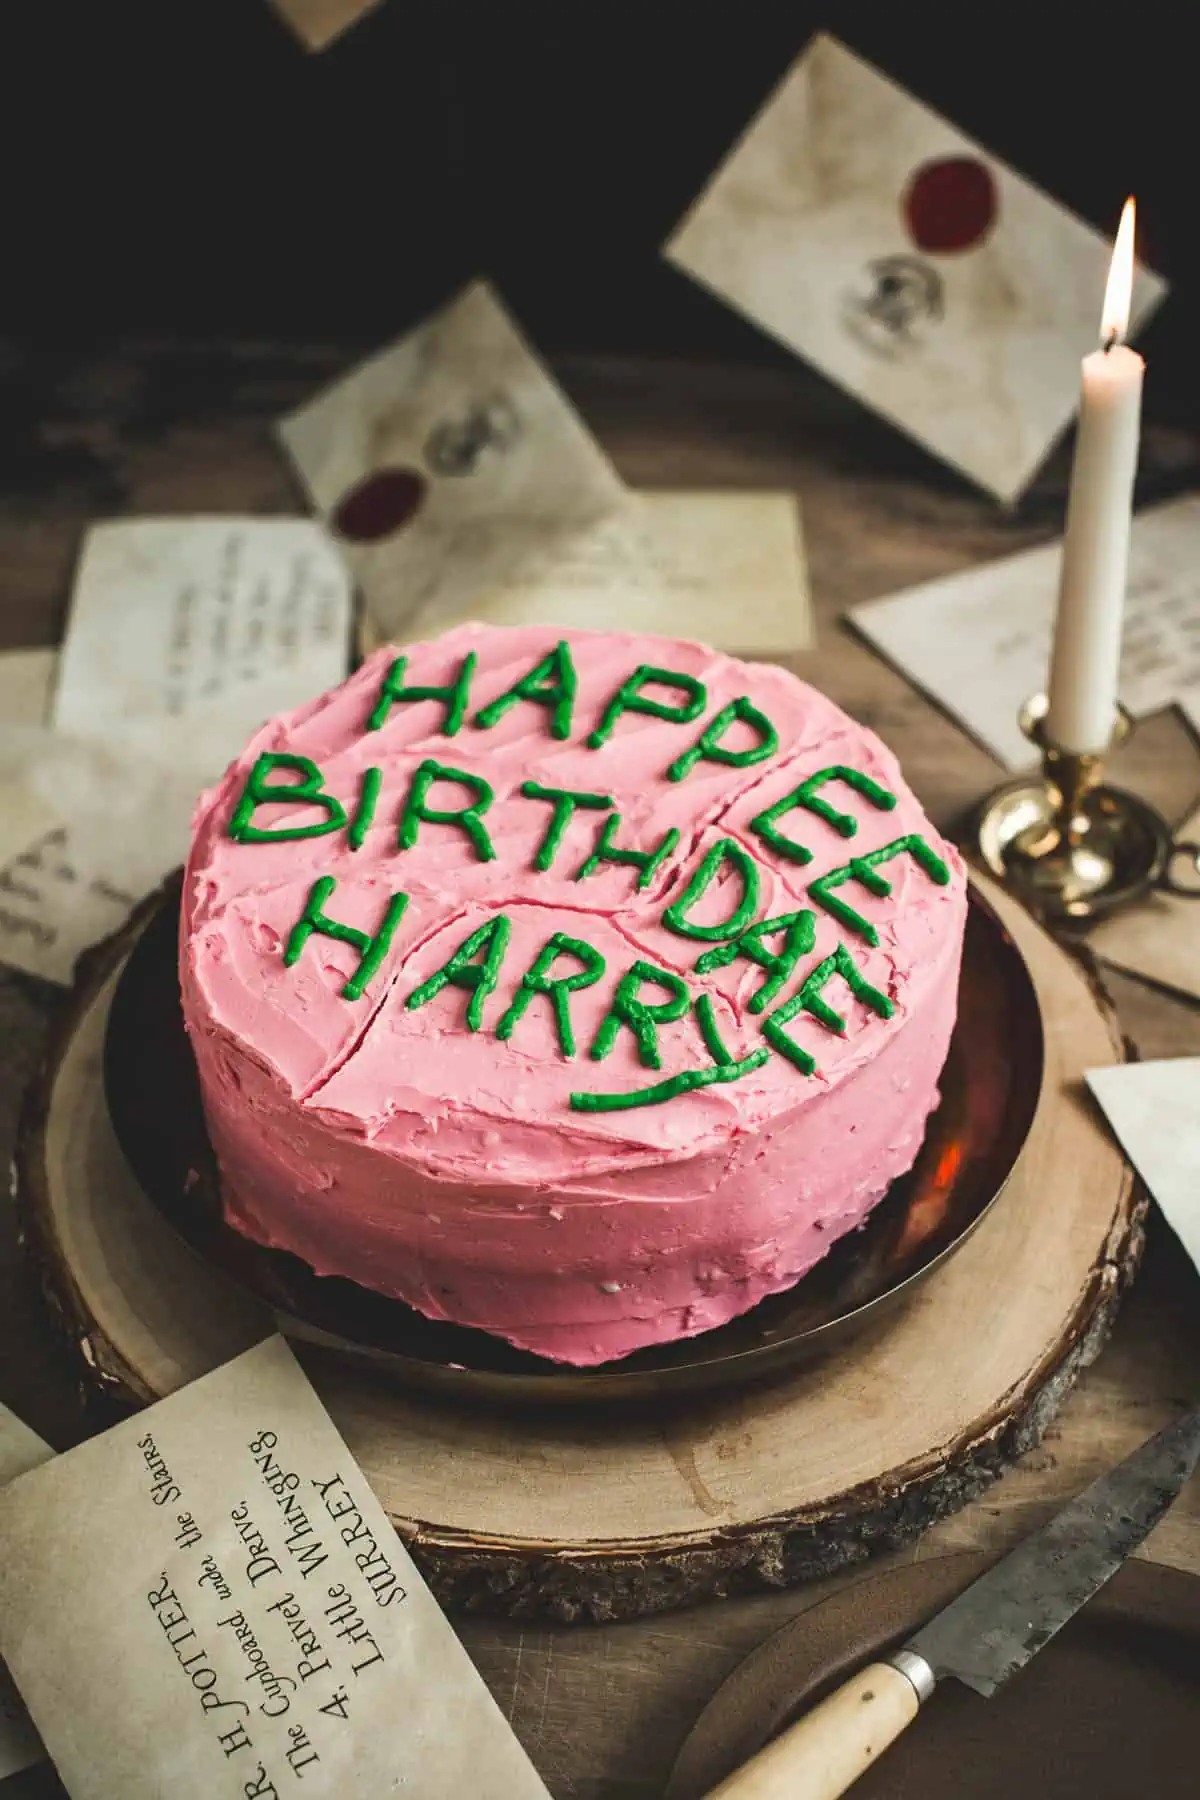 Creative Ways Harry Potter Fans Can Celebrate the Franchise